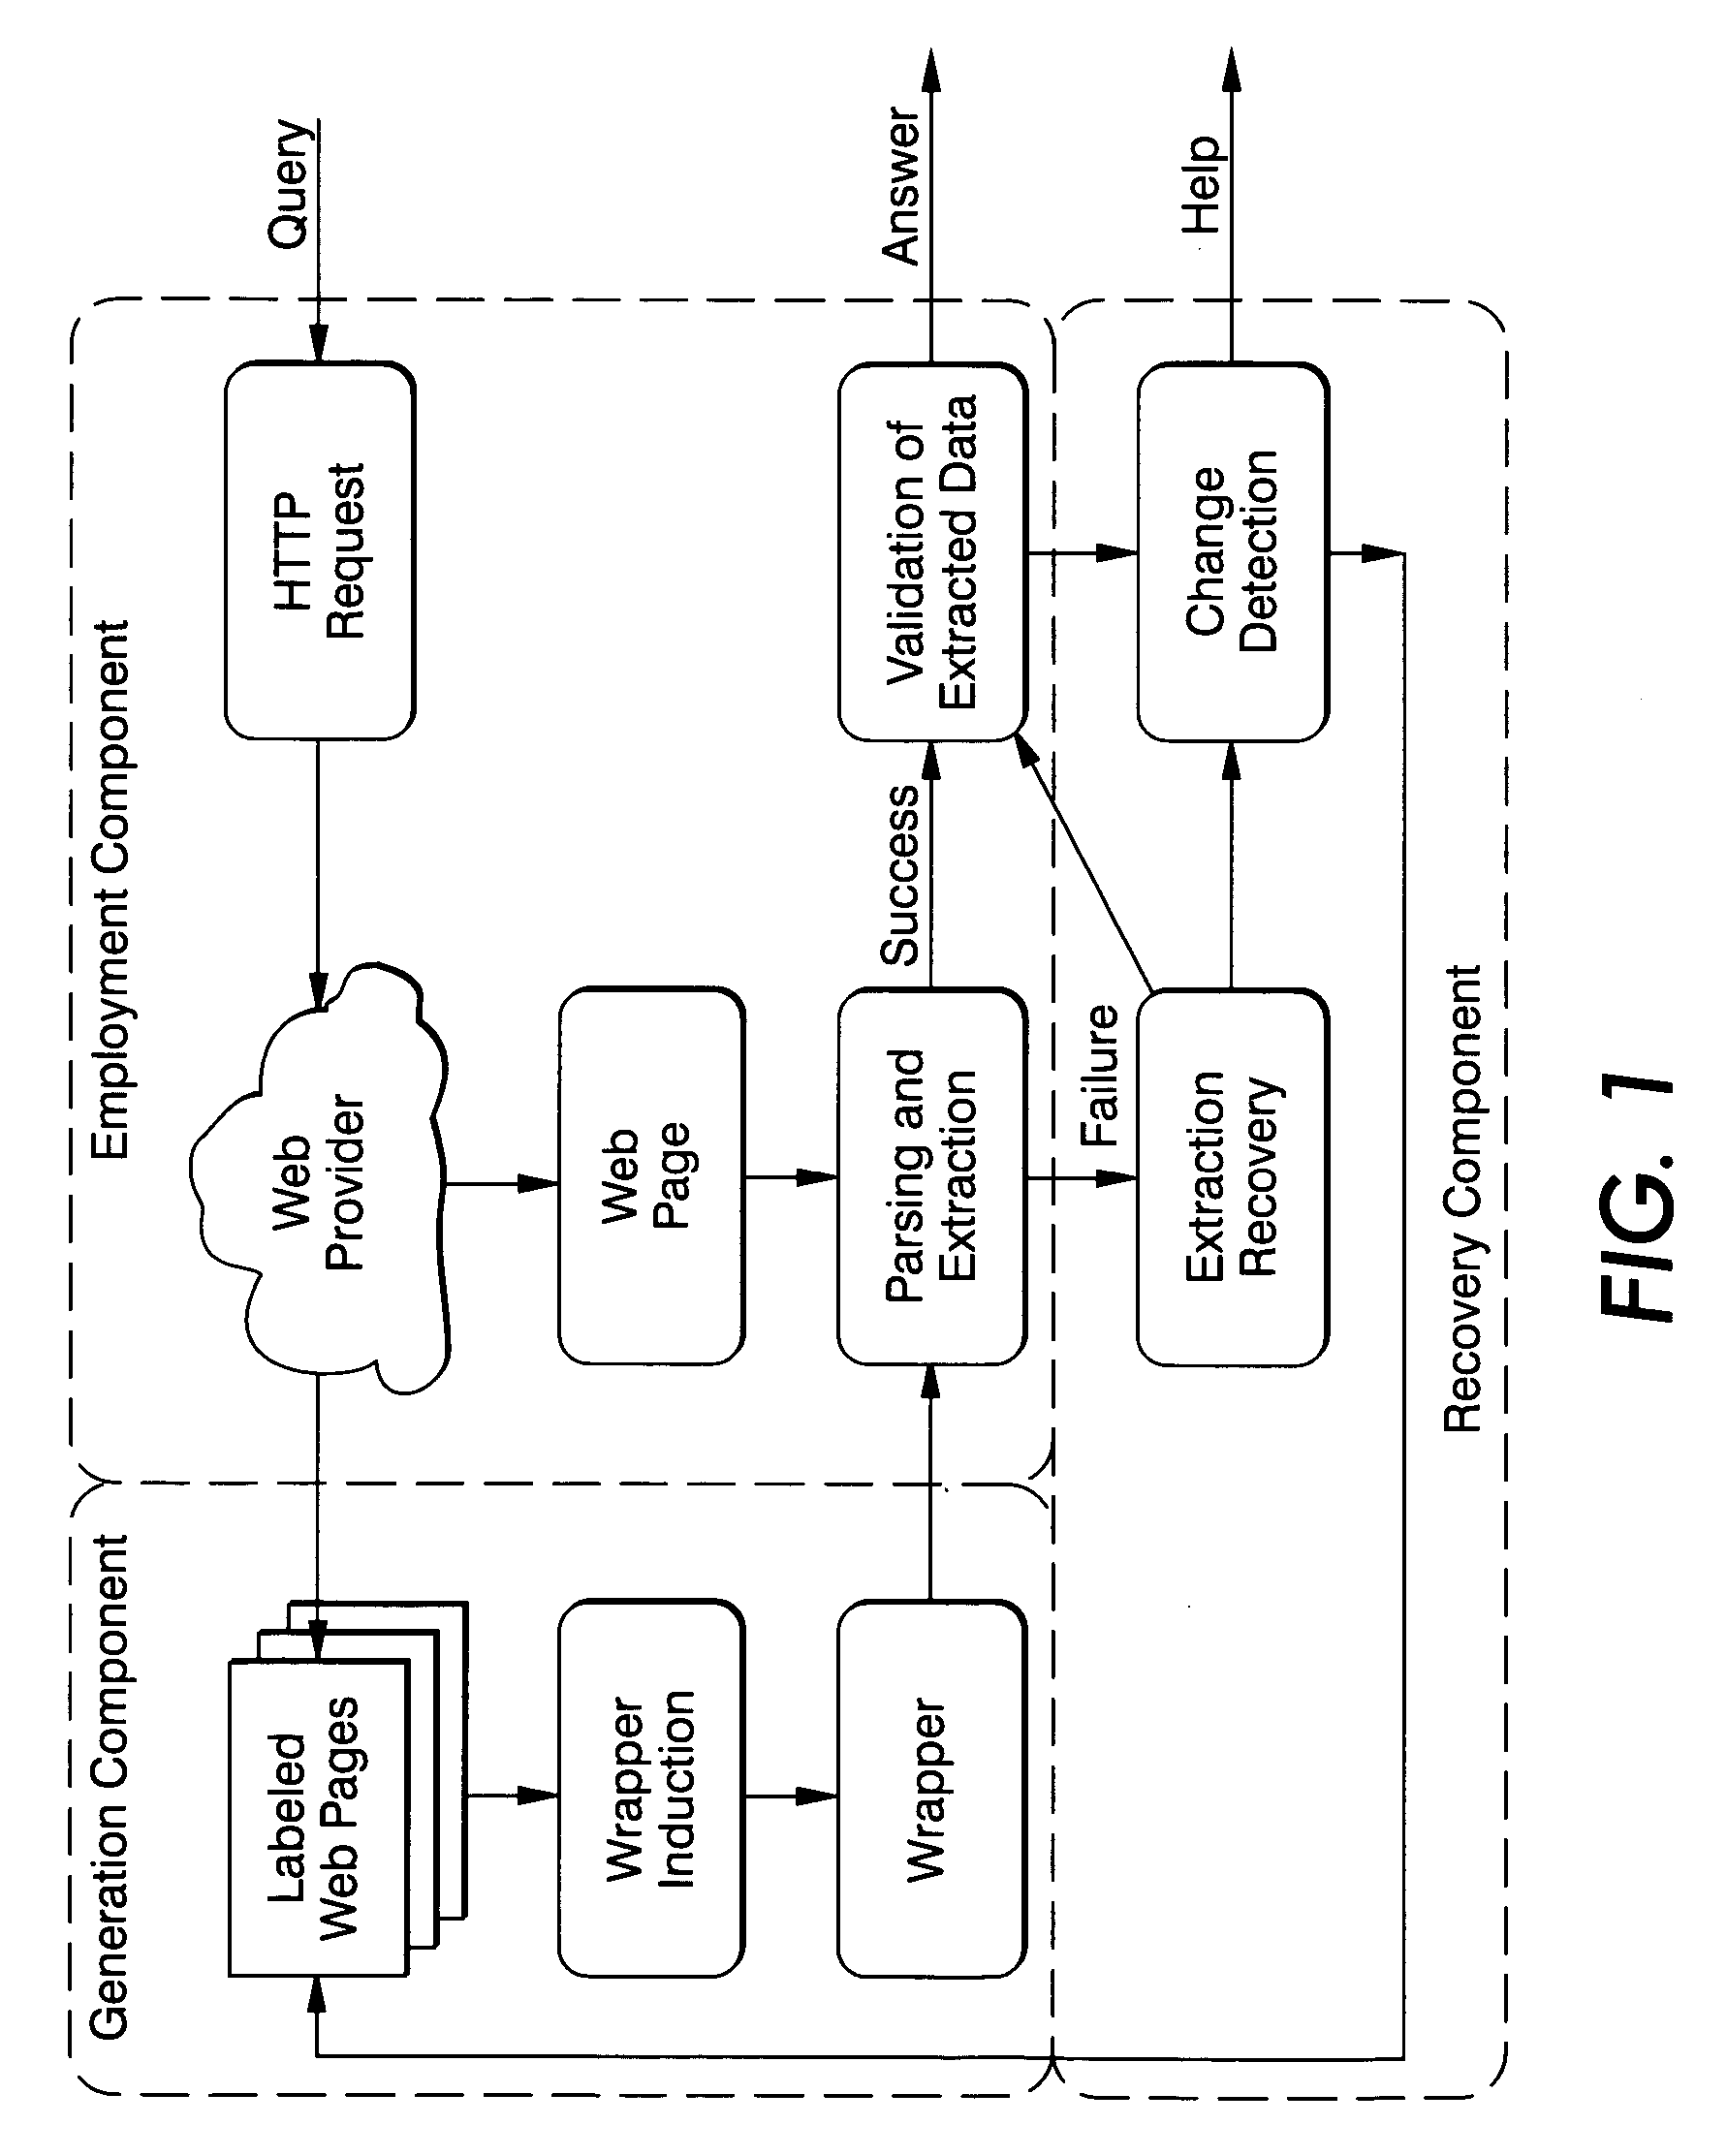 Method for automatic wrapper repair